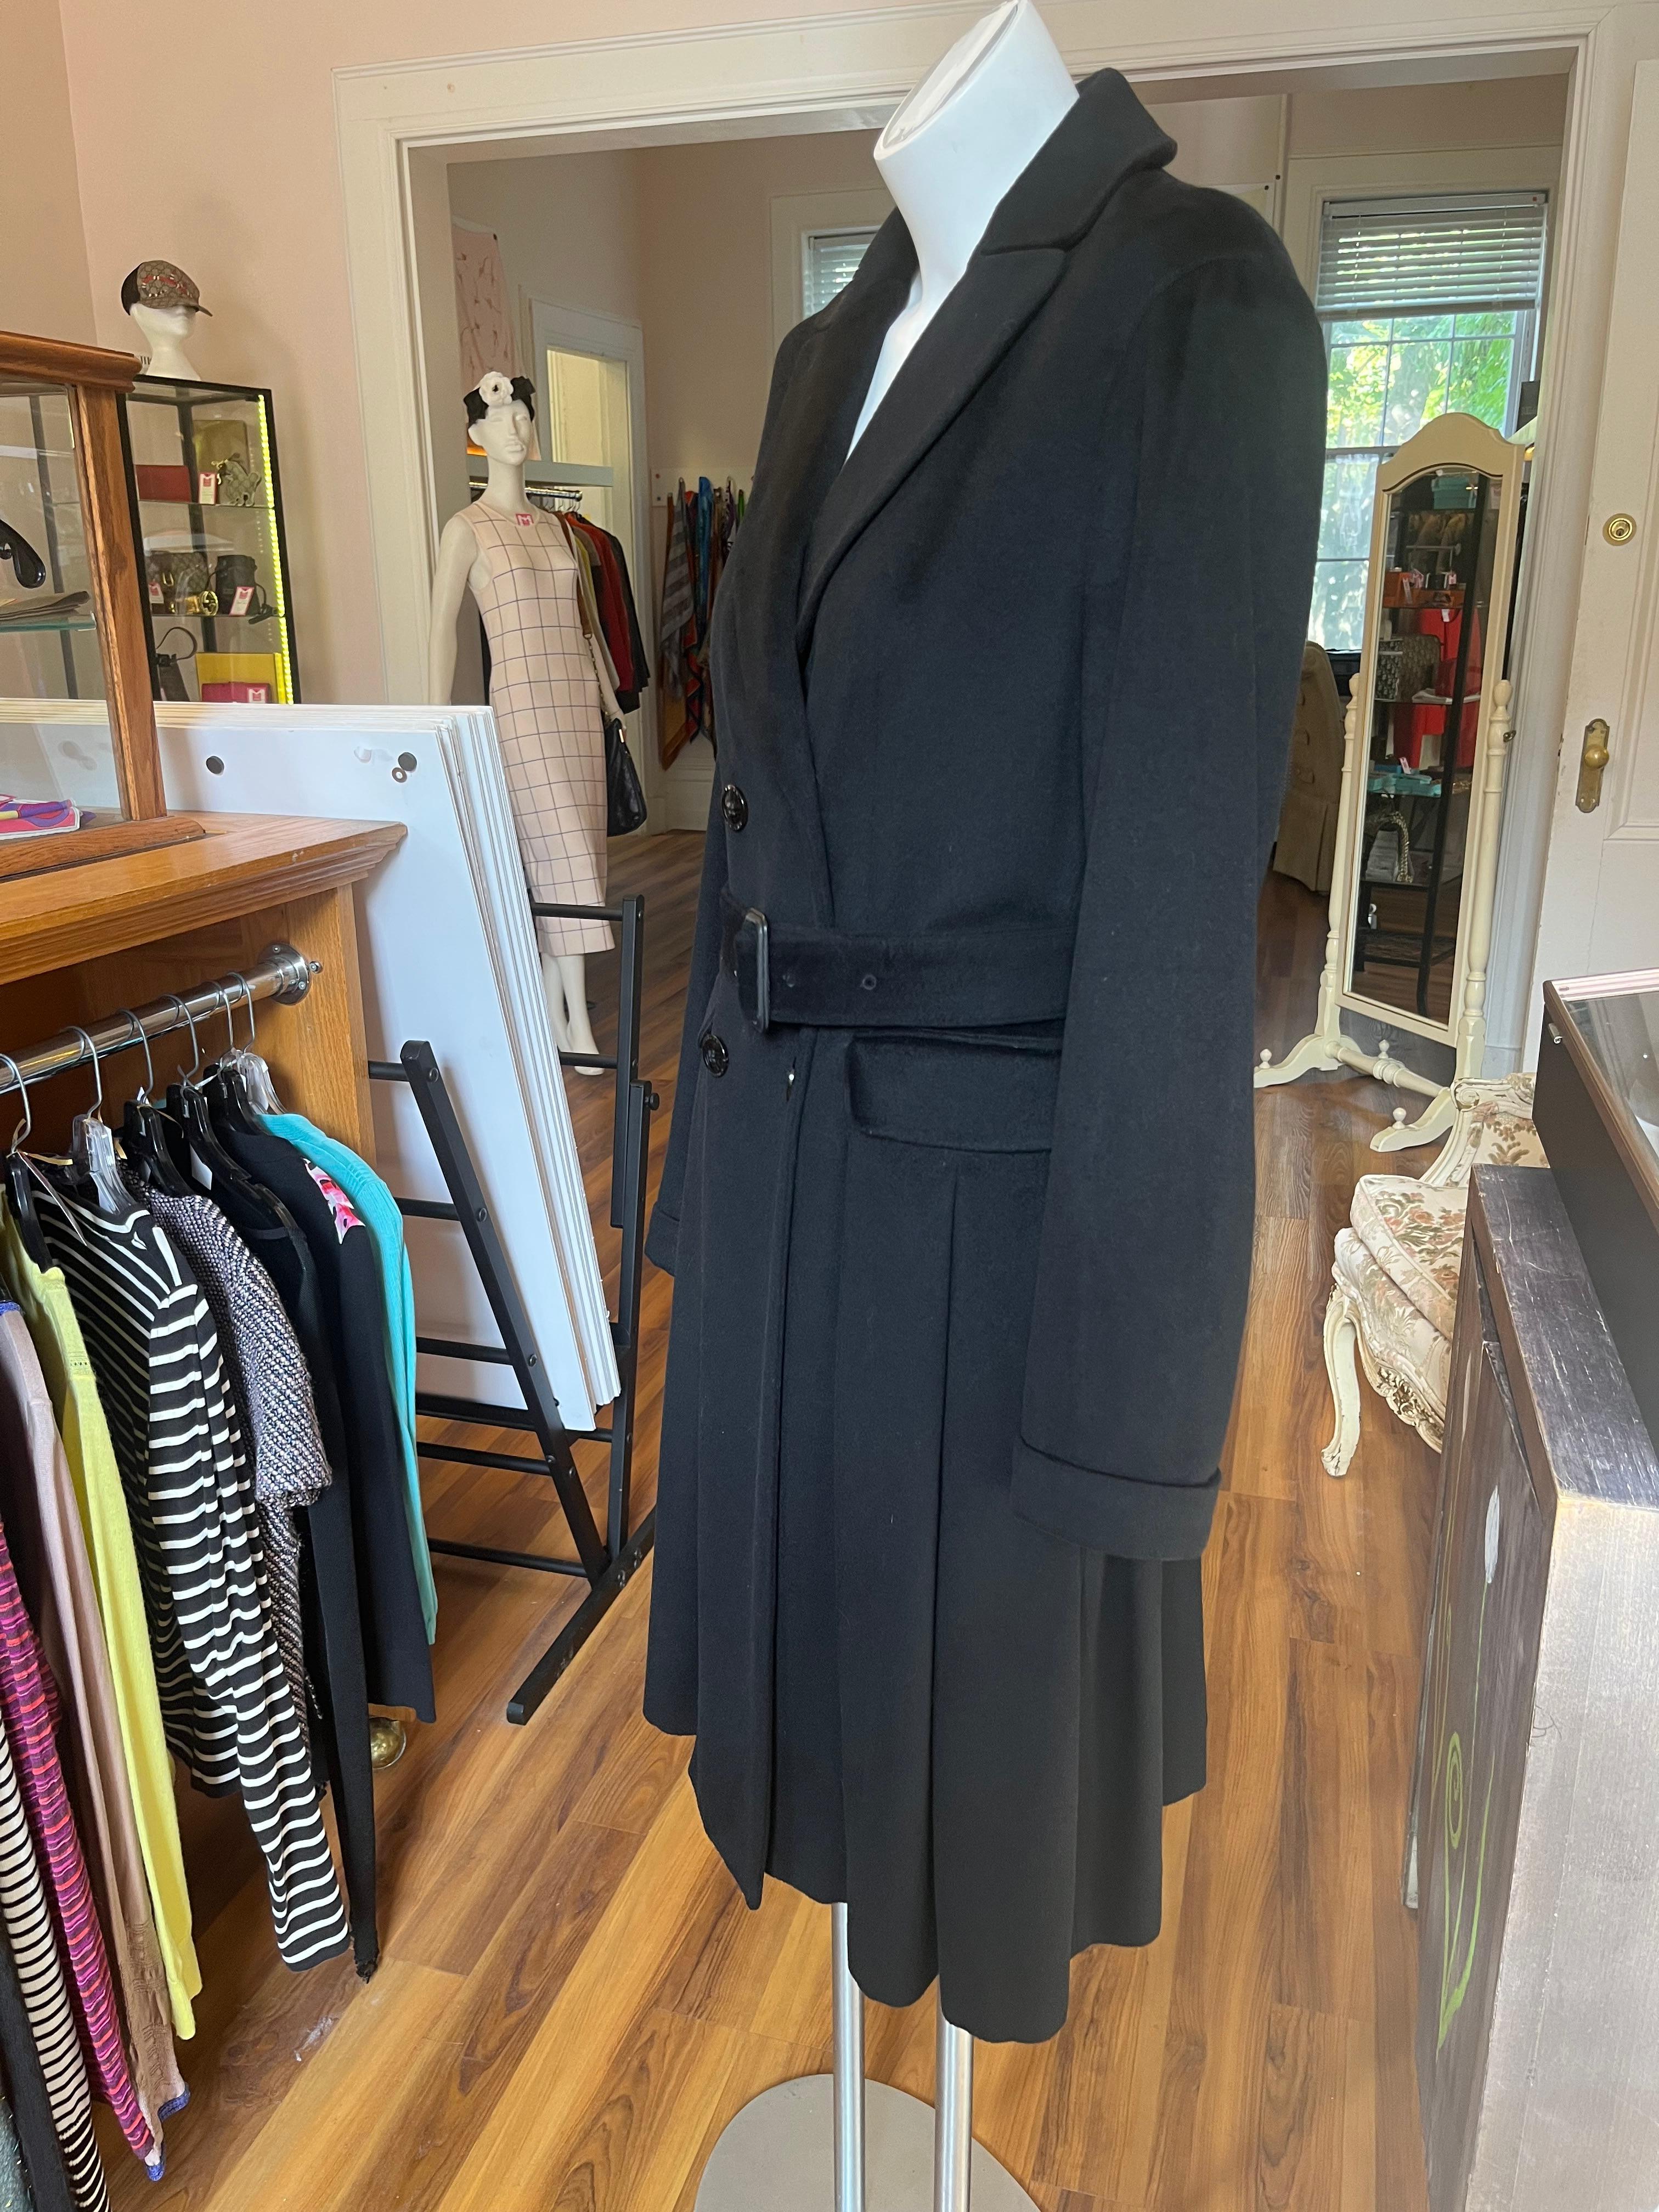 Made by Burberry's a British company well known for its high-end coats, this black wool/cashmere blend coat is beautifully tailored.
It has a notched lapel; adjustable belt; four Burberry engraved buttons at the front, and one on the inside; two